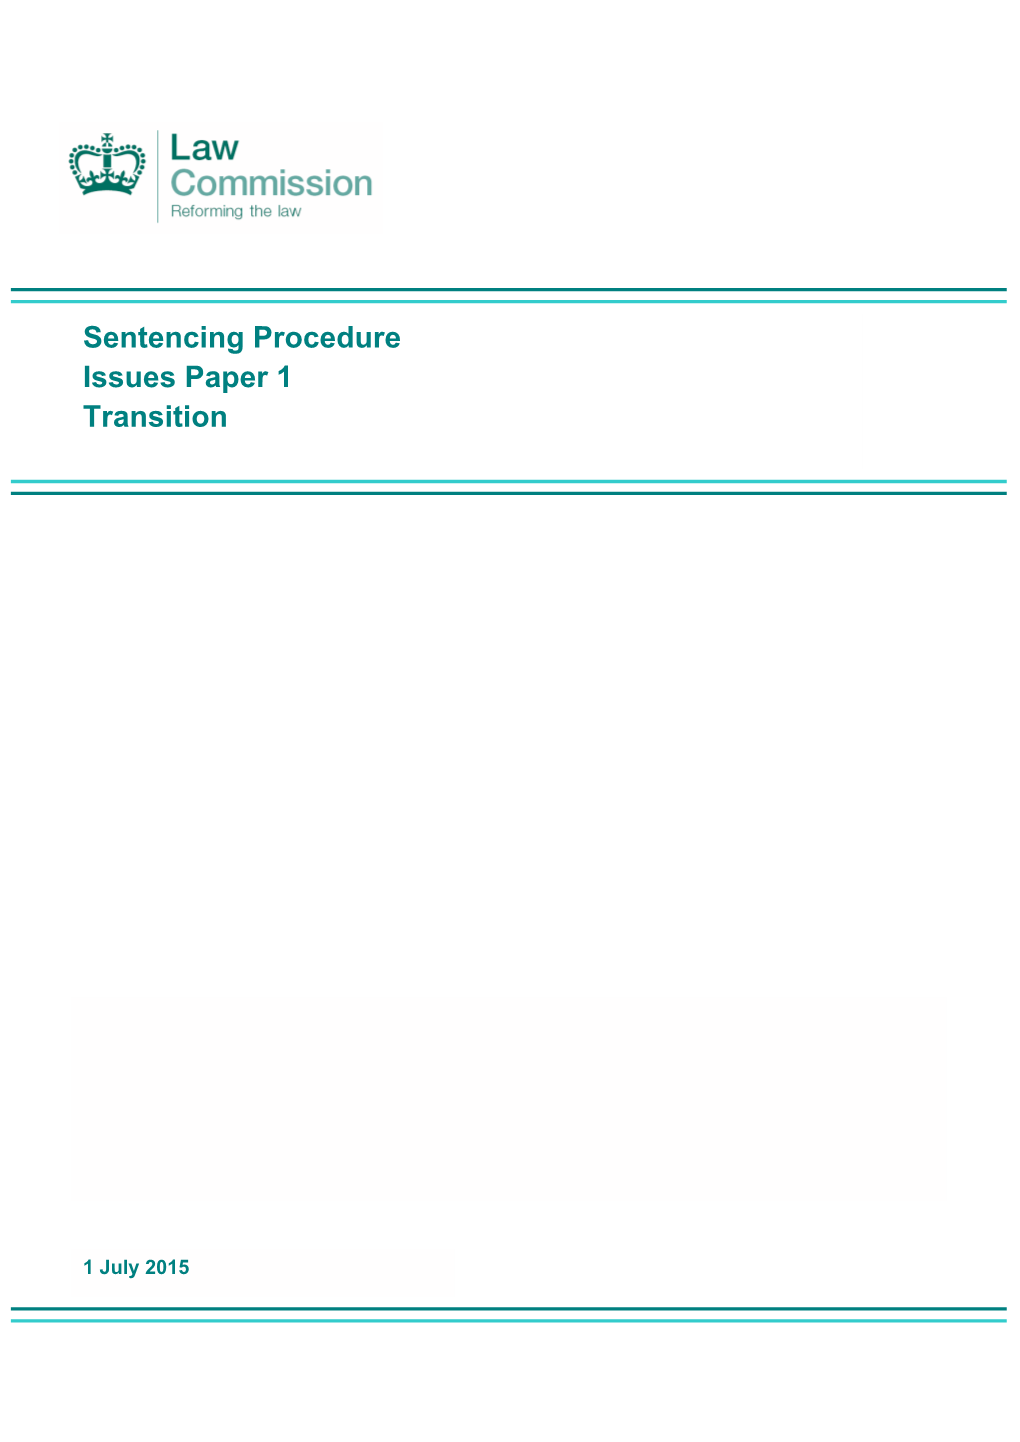 Sentencing Procedure Issues Paper 1 Transition